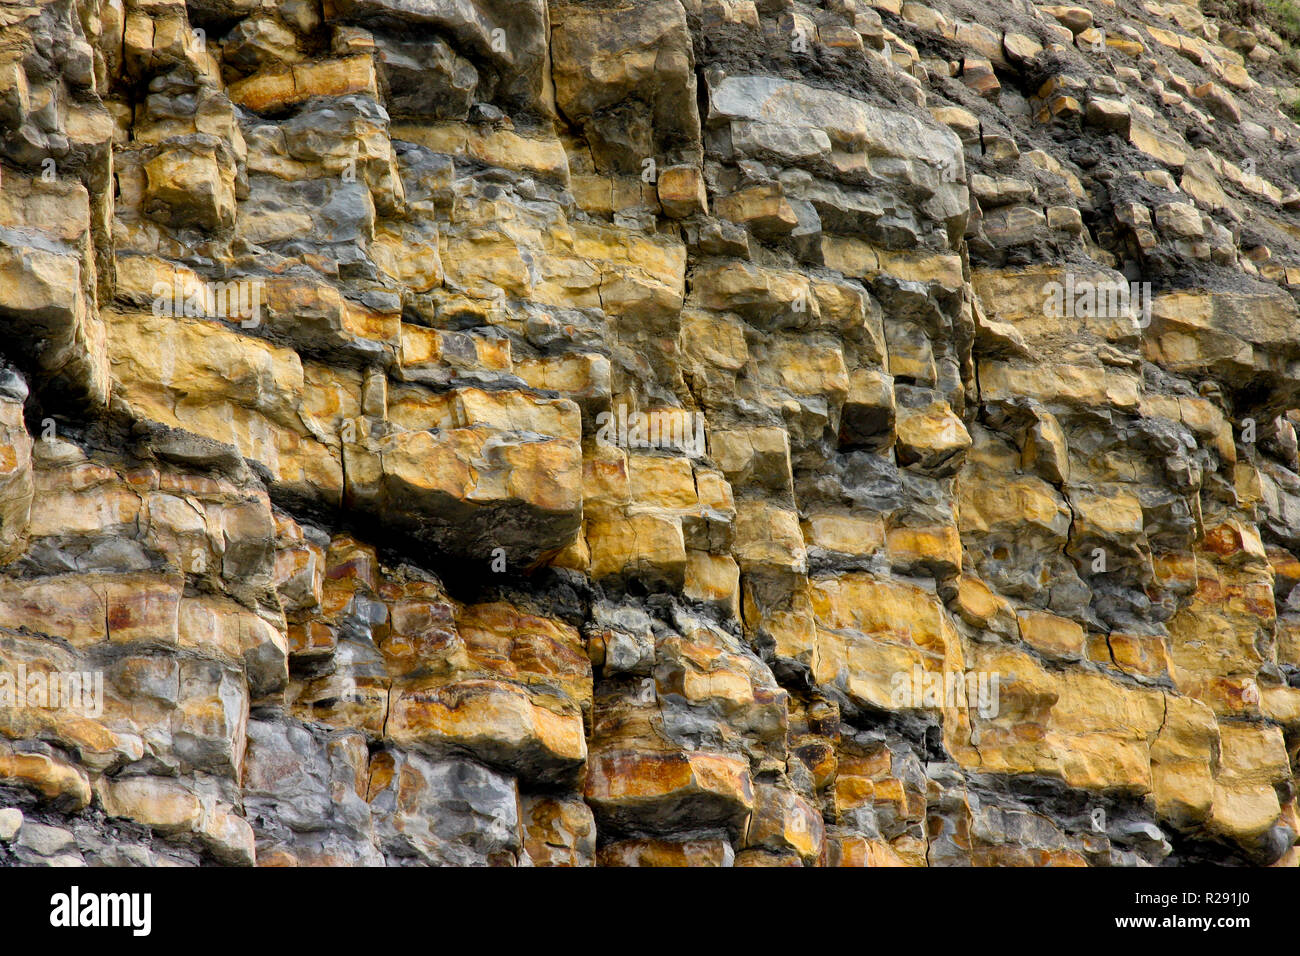 Layers of rock strata in the unstable cliff face at Nash Point, South Wales, UK Stock Photo